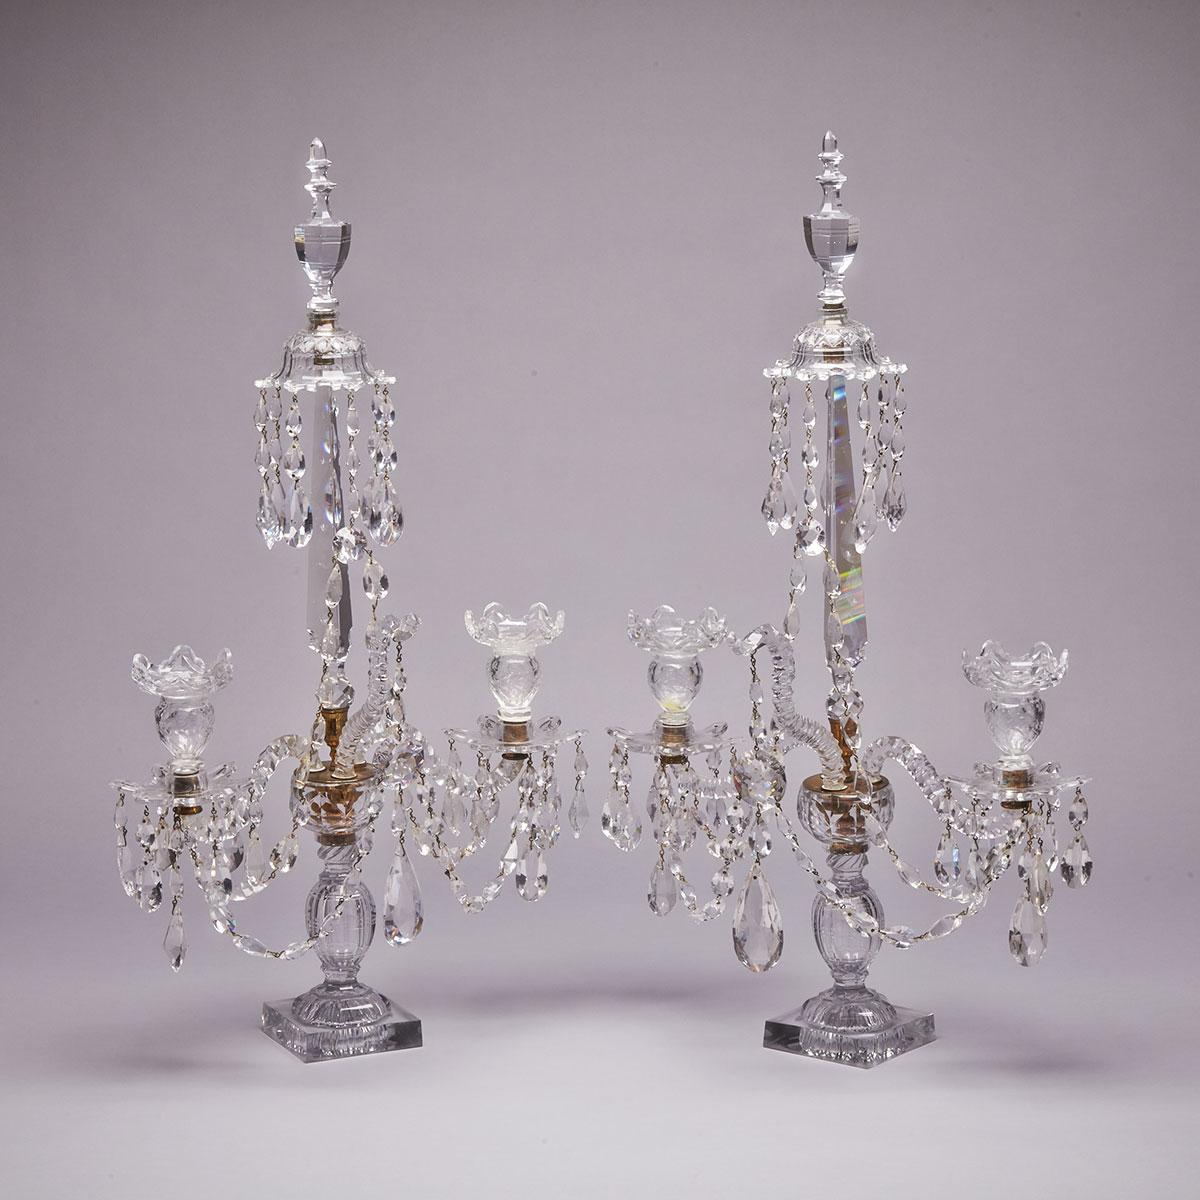 Pair of Anglo-Irish Cut Glass Two-Light Candelabra, late 18th/early 19th century